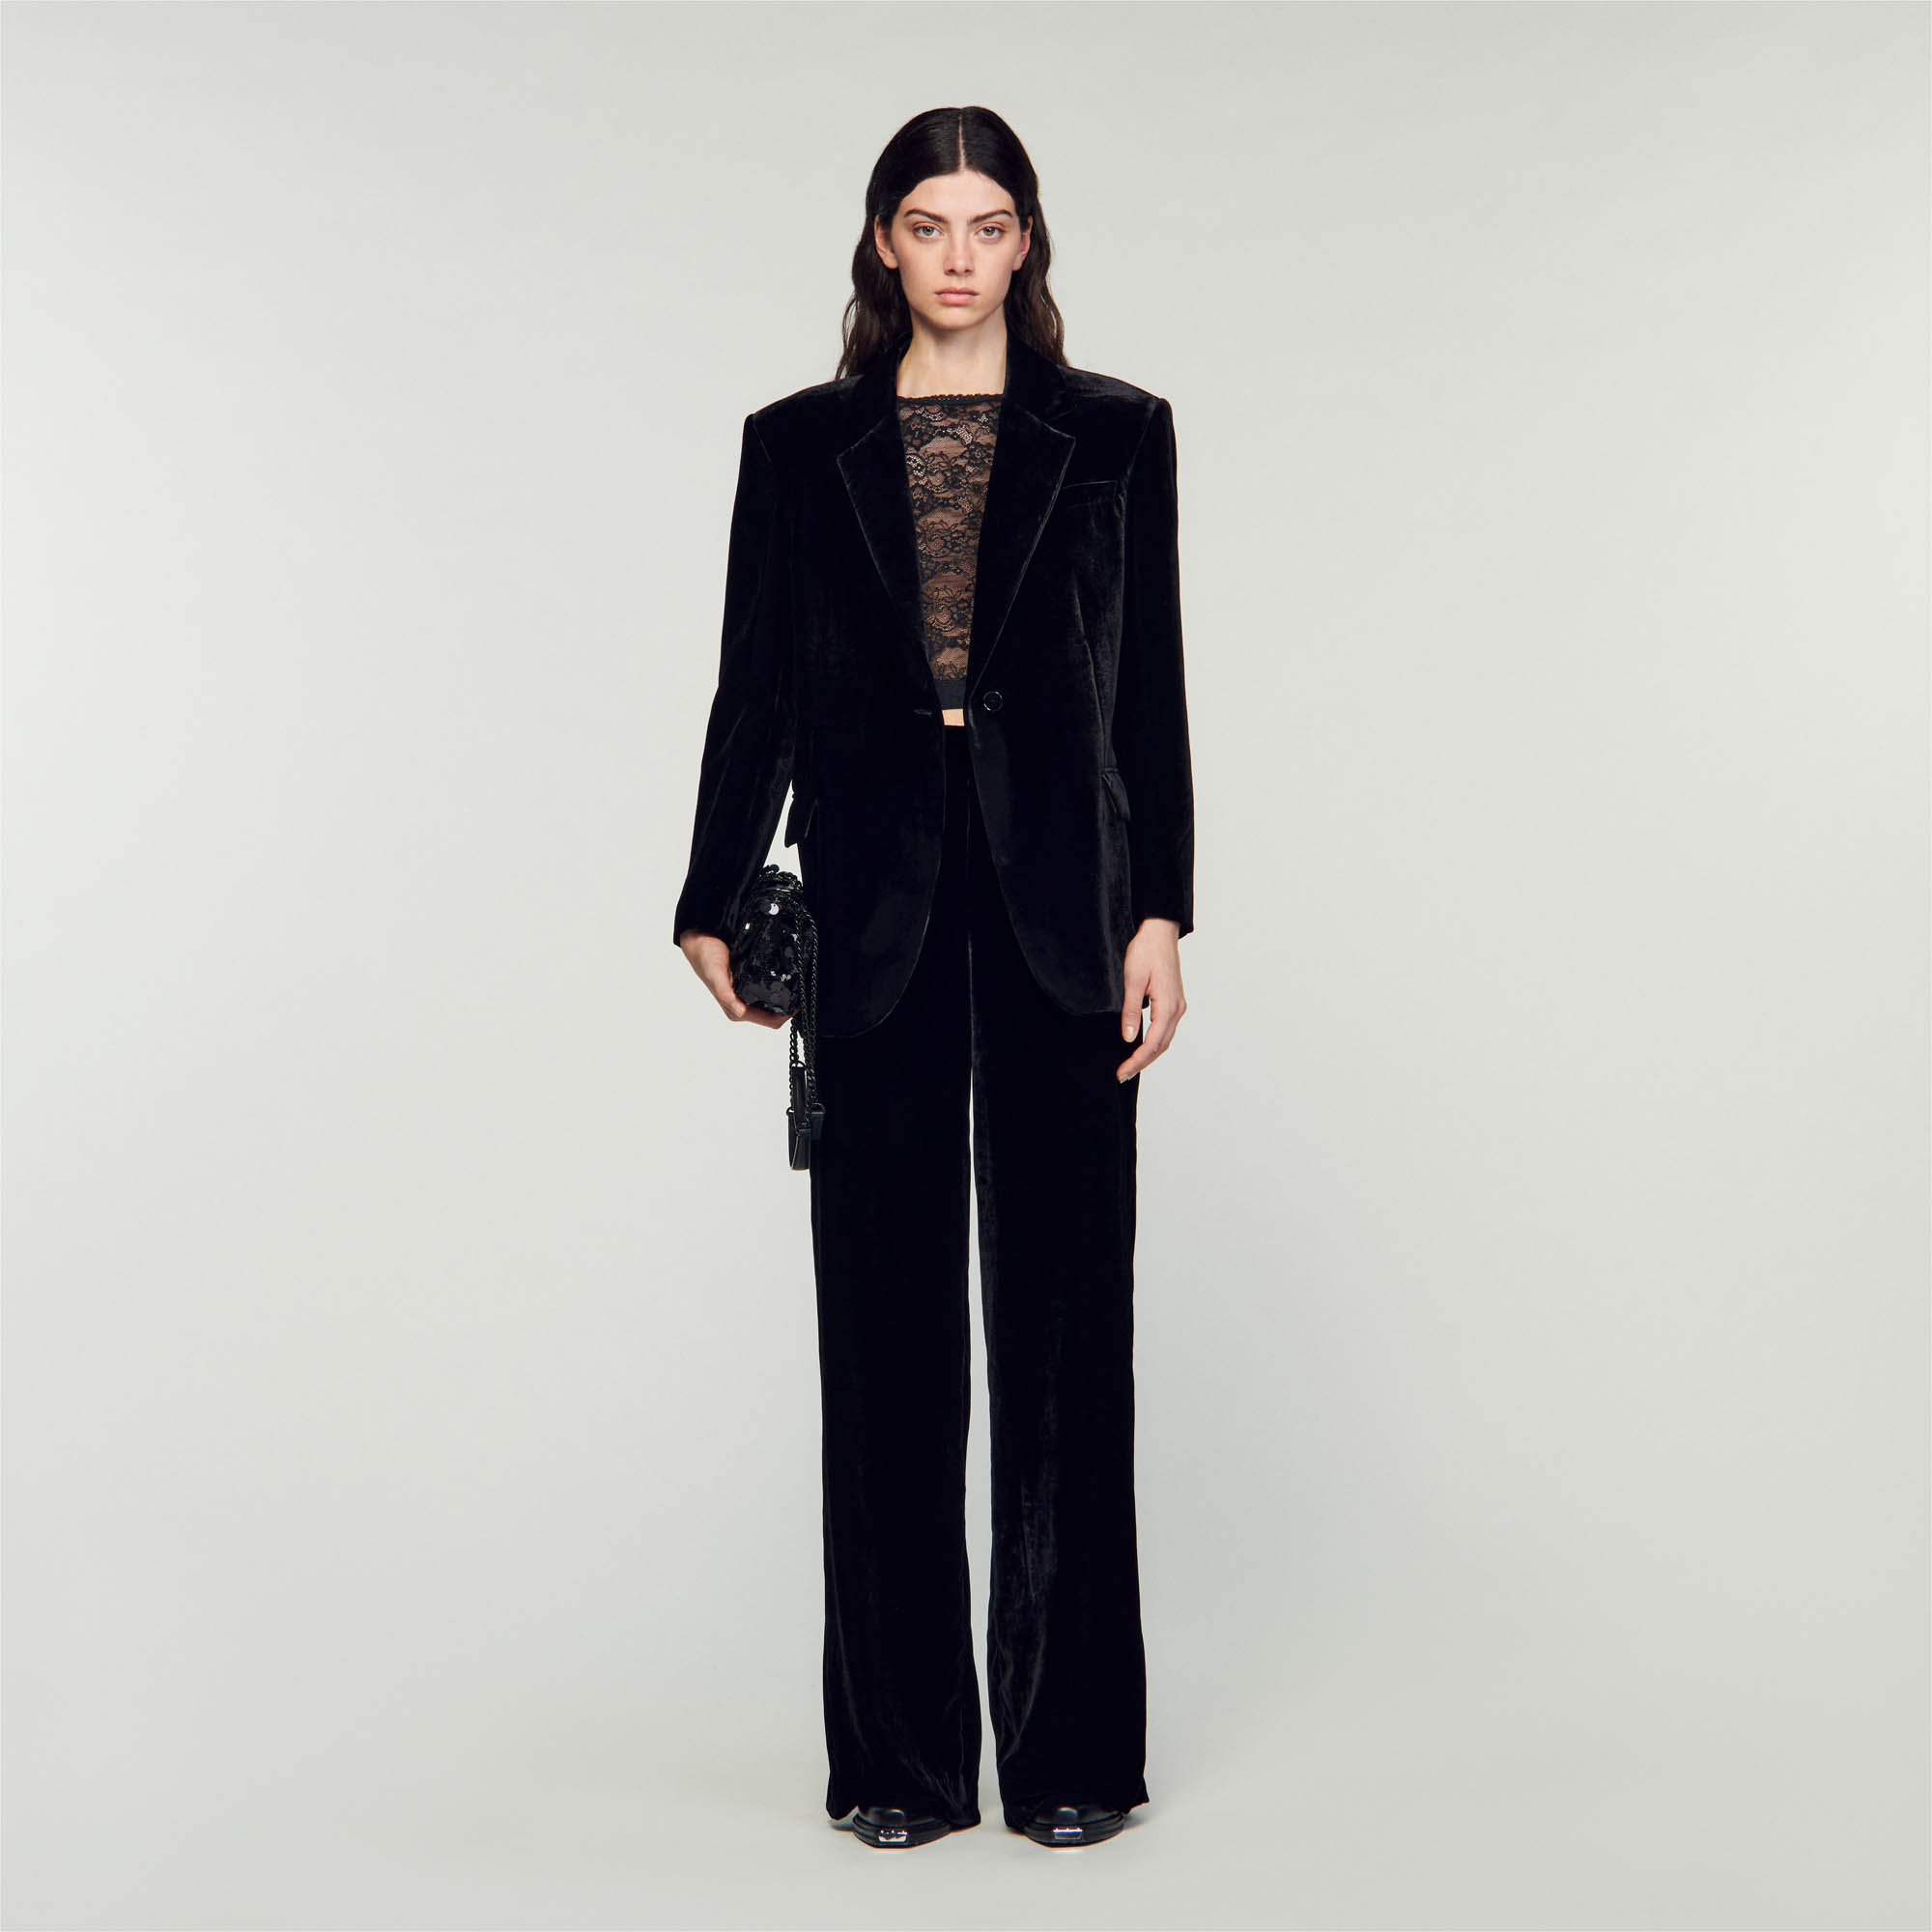 Sandro viscose Velvet suit jacket with lapel collar, long sleeves and welt pockets at the waist